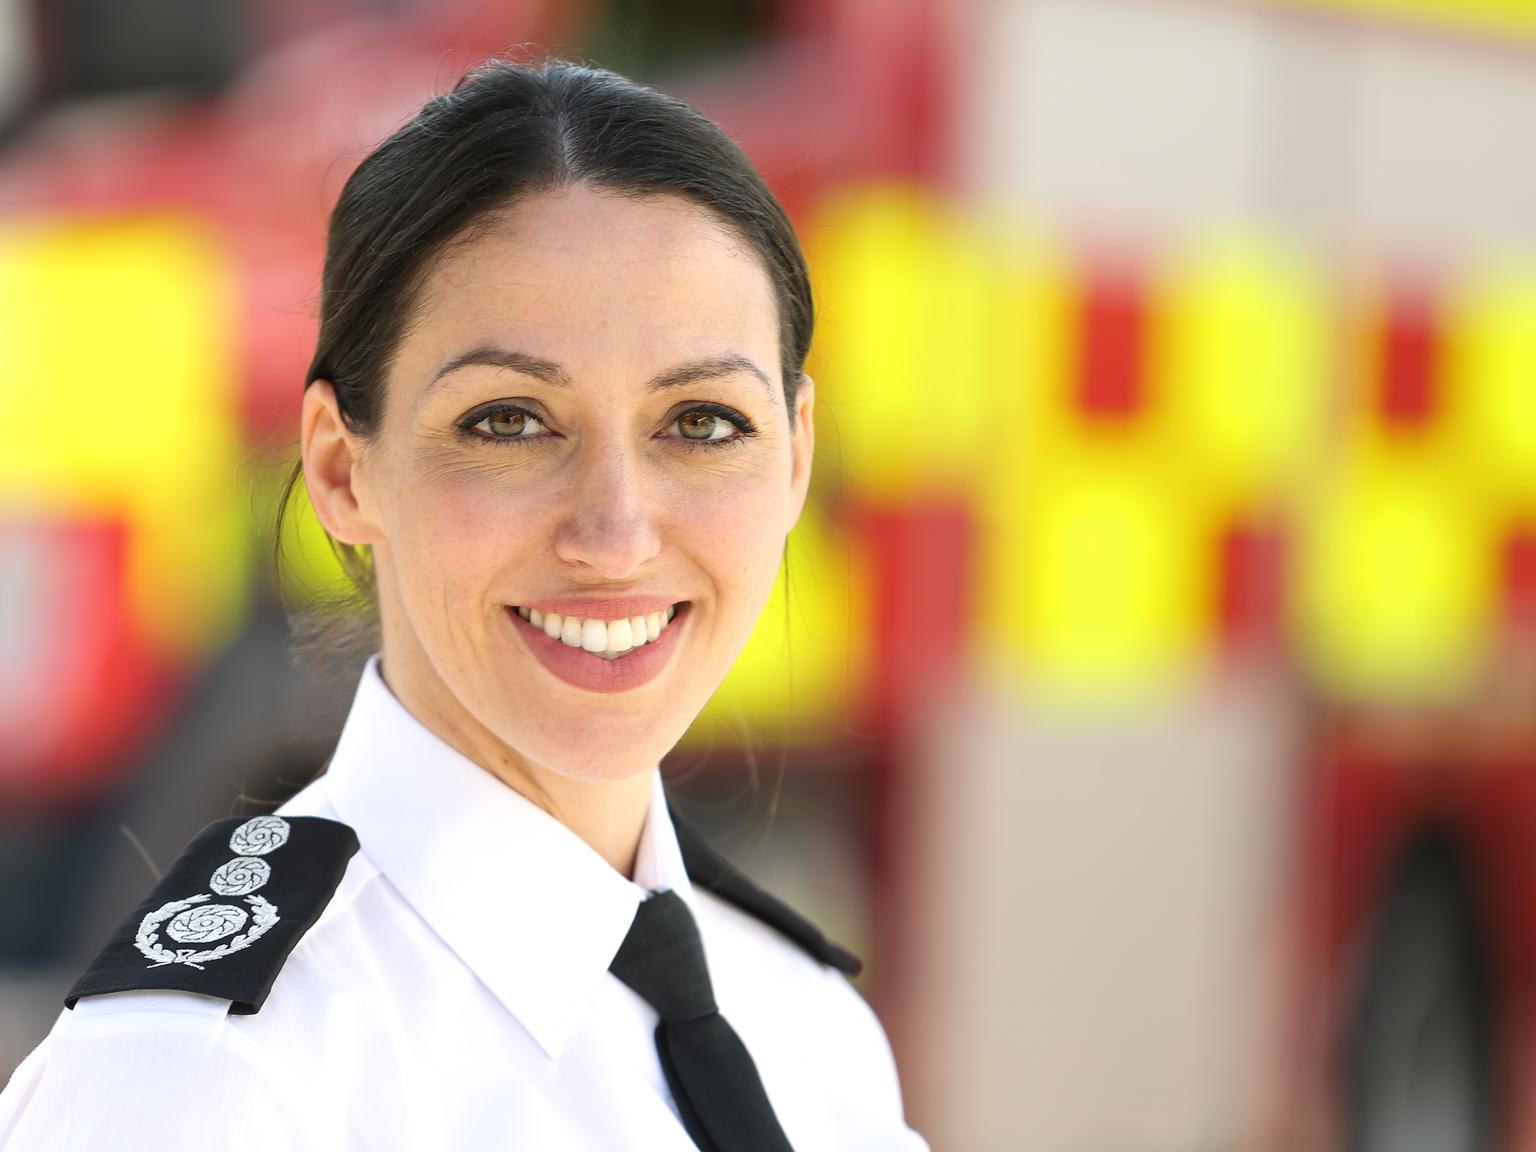 Dr Cohen-Hatton joined the fire service in South Wales in 2001 at the age of eighteen, she was made chief fire officer of West Sussex Fire and Rescue in 2019.